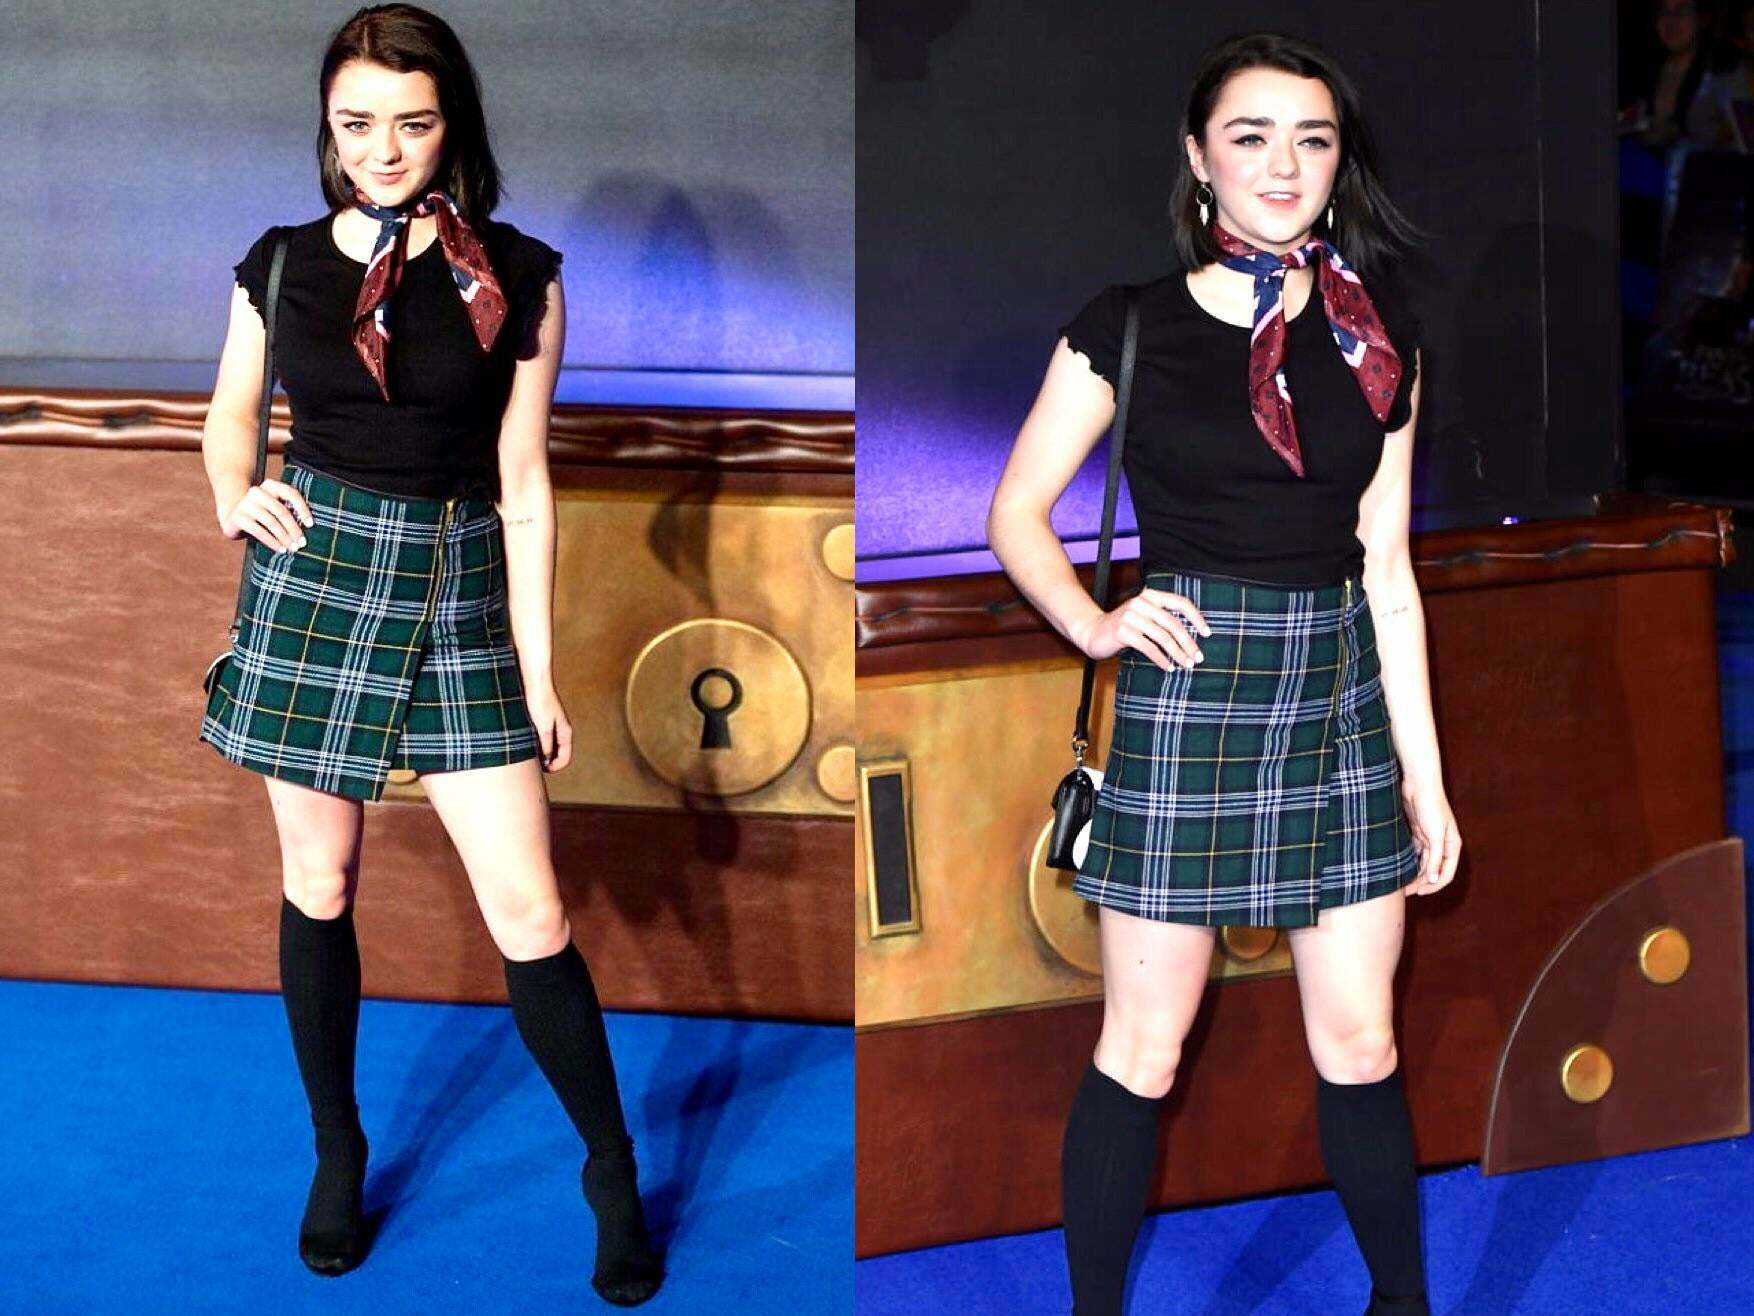 Maisie Williams is such a fucking cock tease